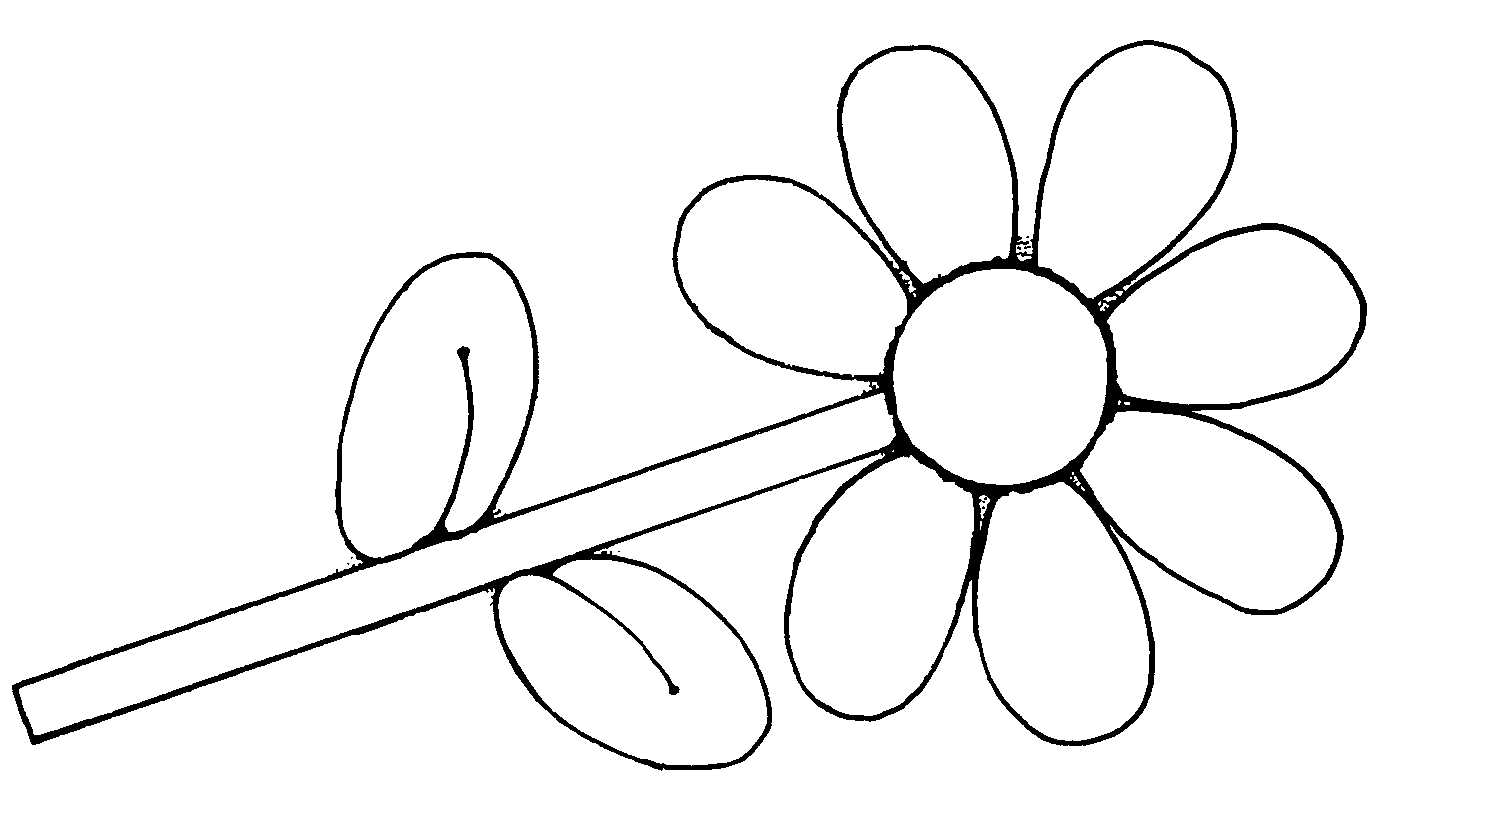 Flower Clipart Black And White Spring Flowers Clip Art free